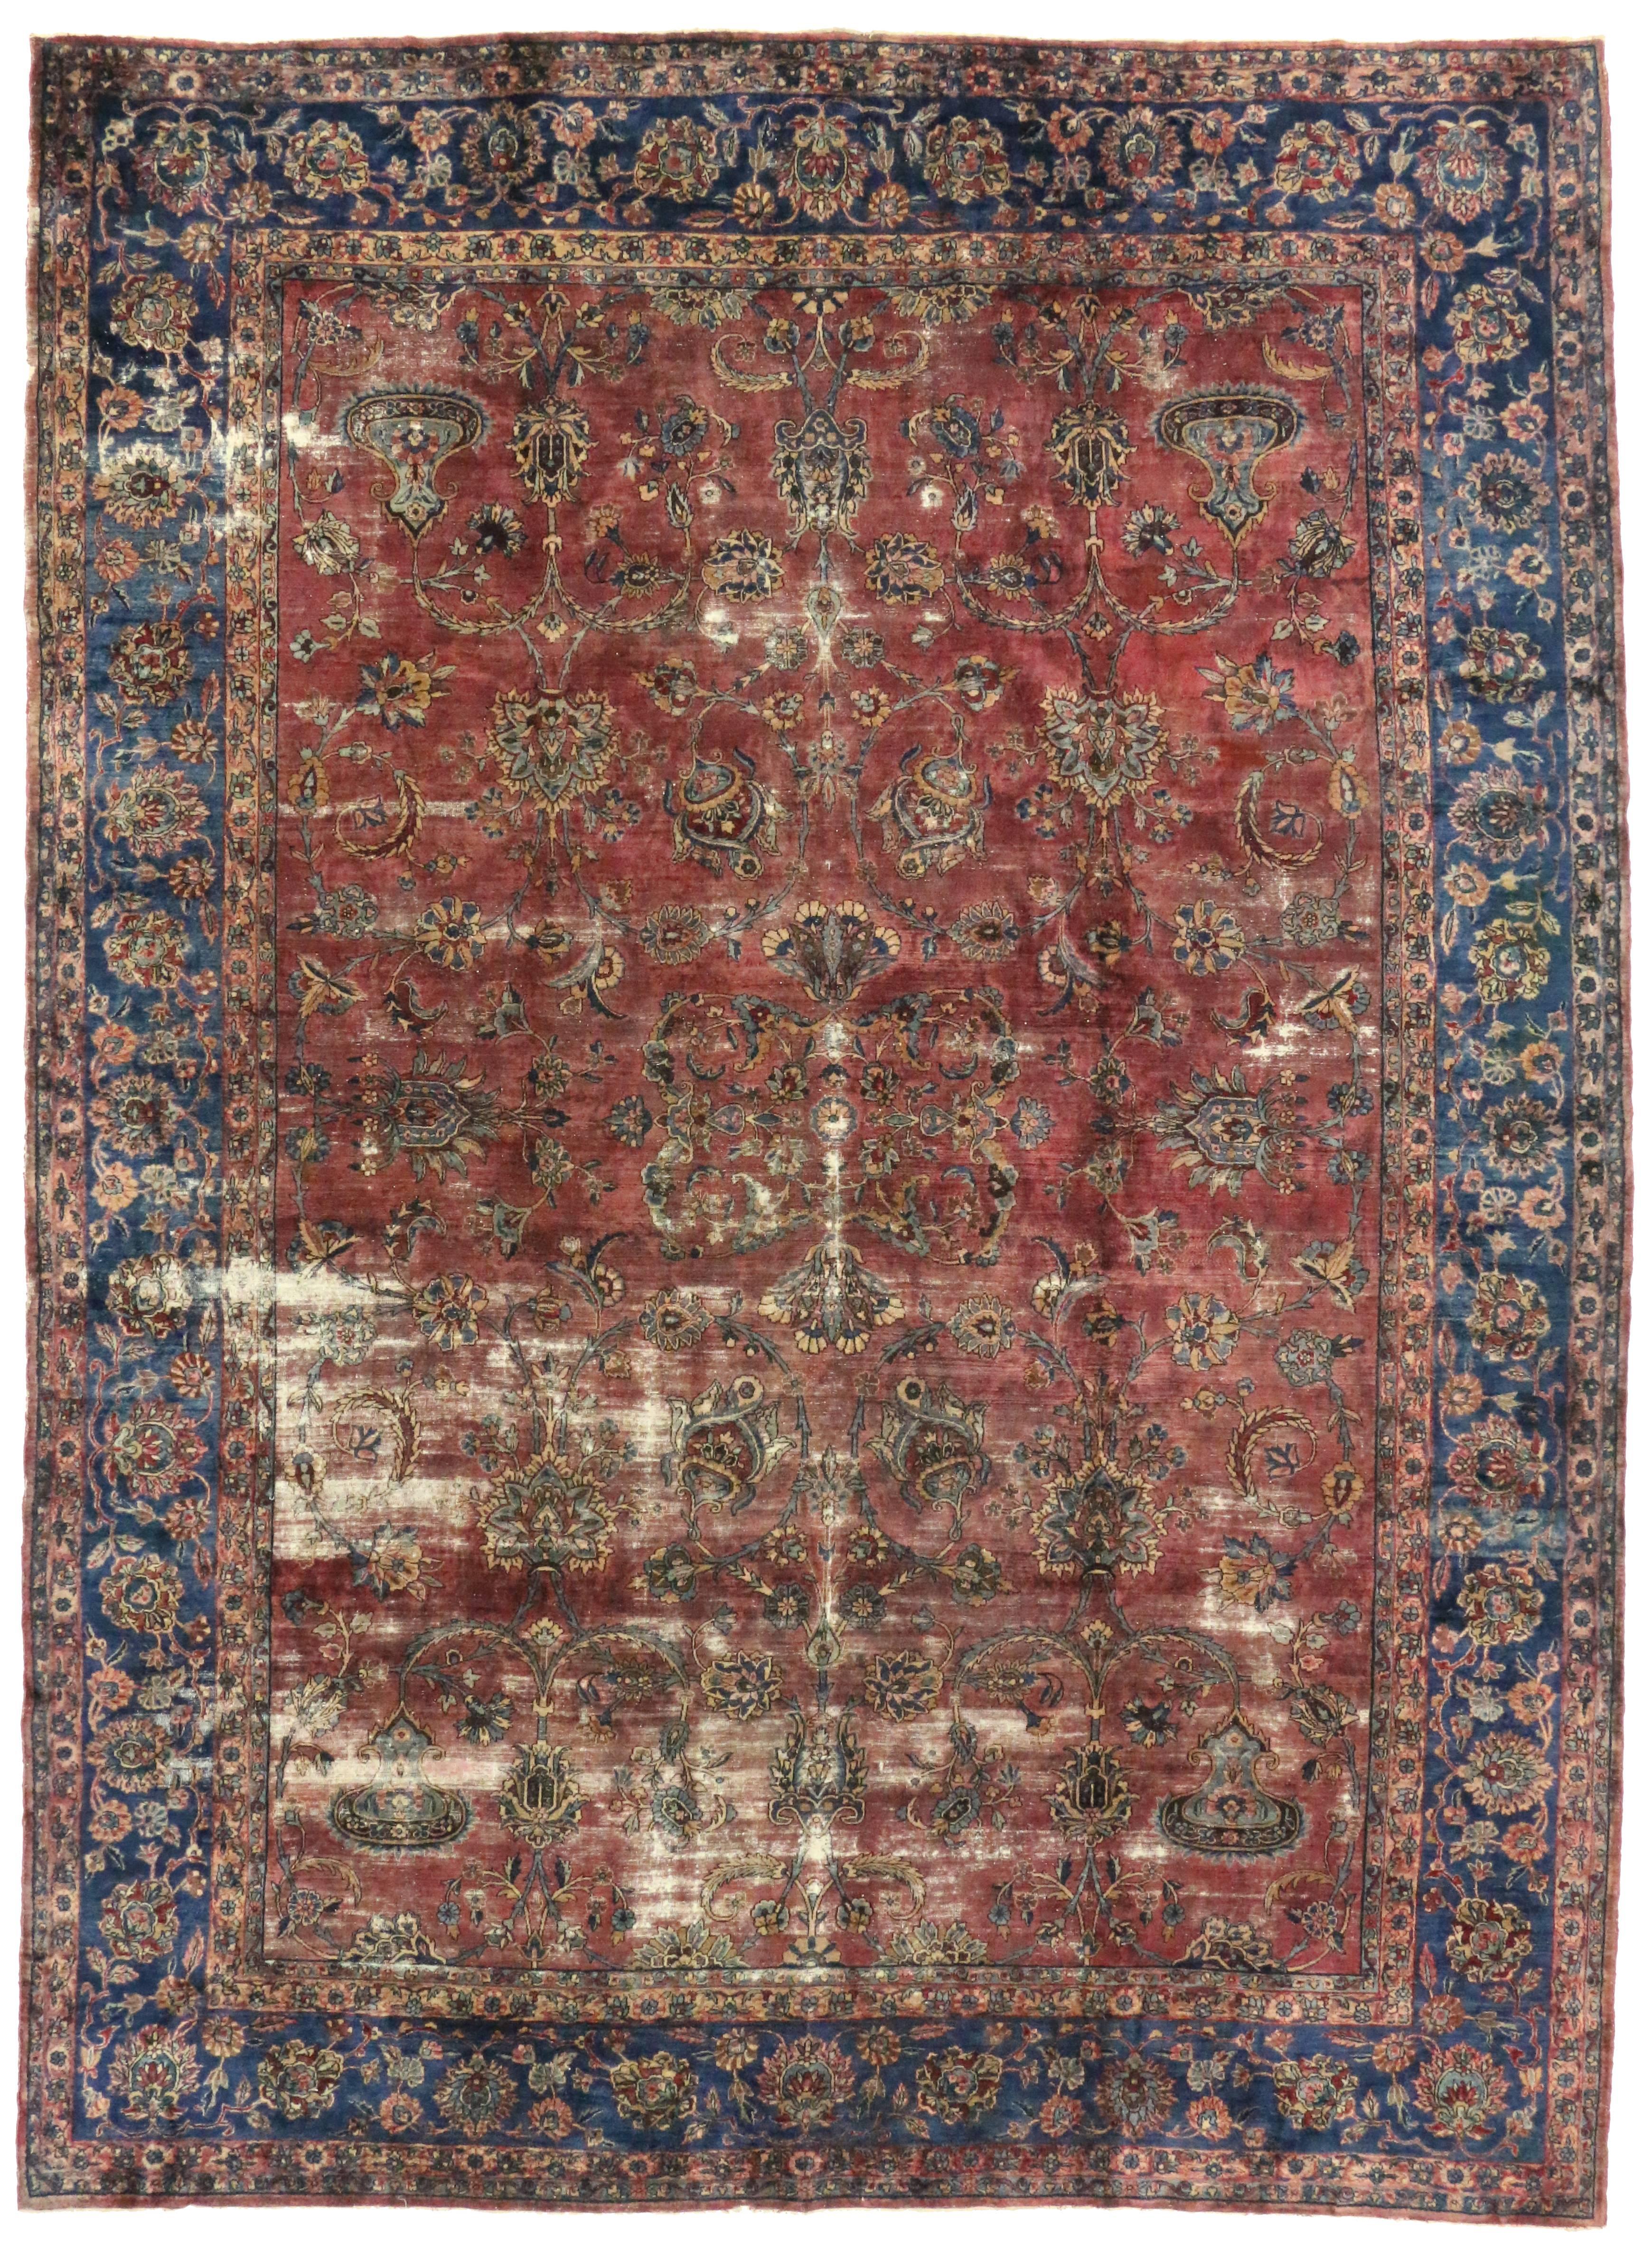 20th Century Distressed Antique Persian Kerman Rug with New England Cape Cod Style For Sale